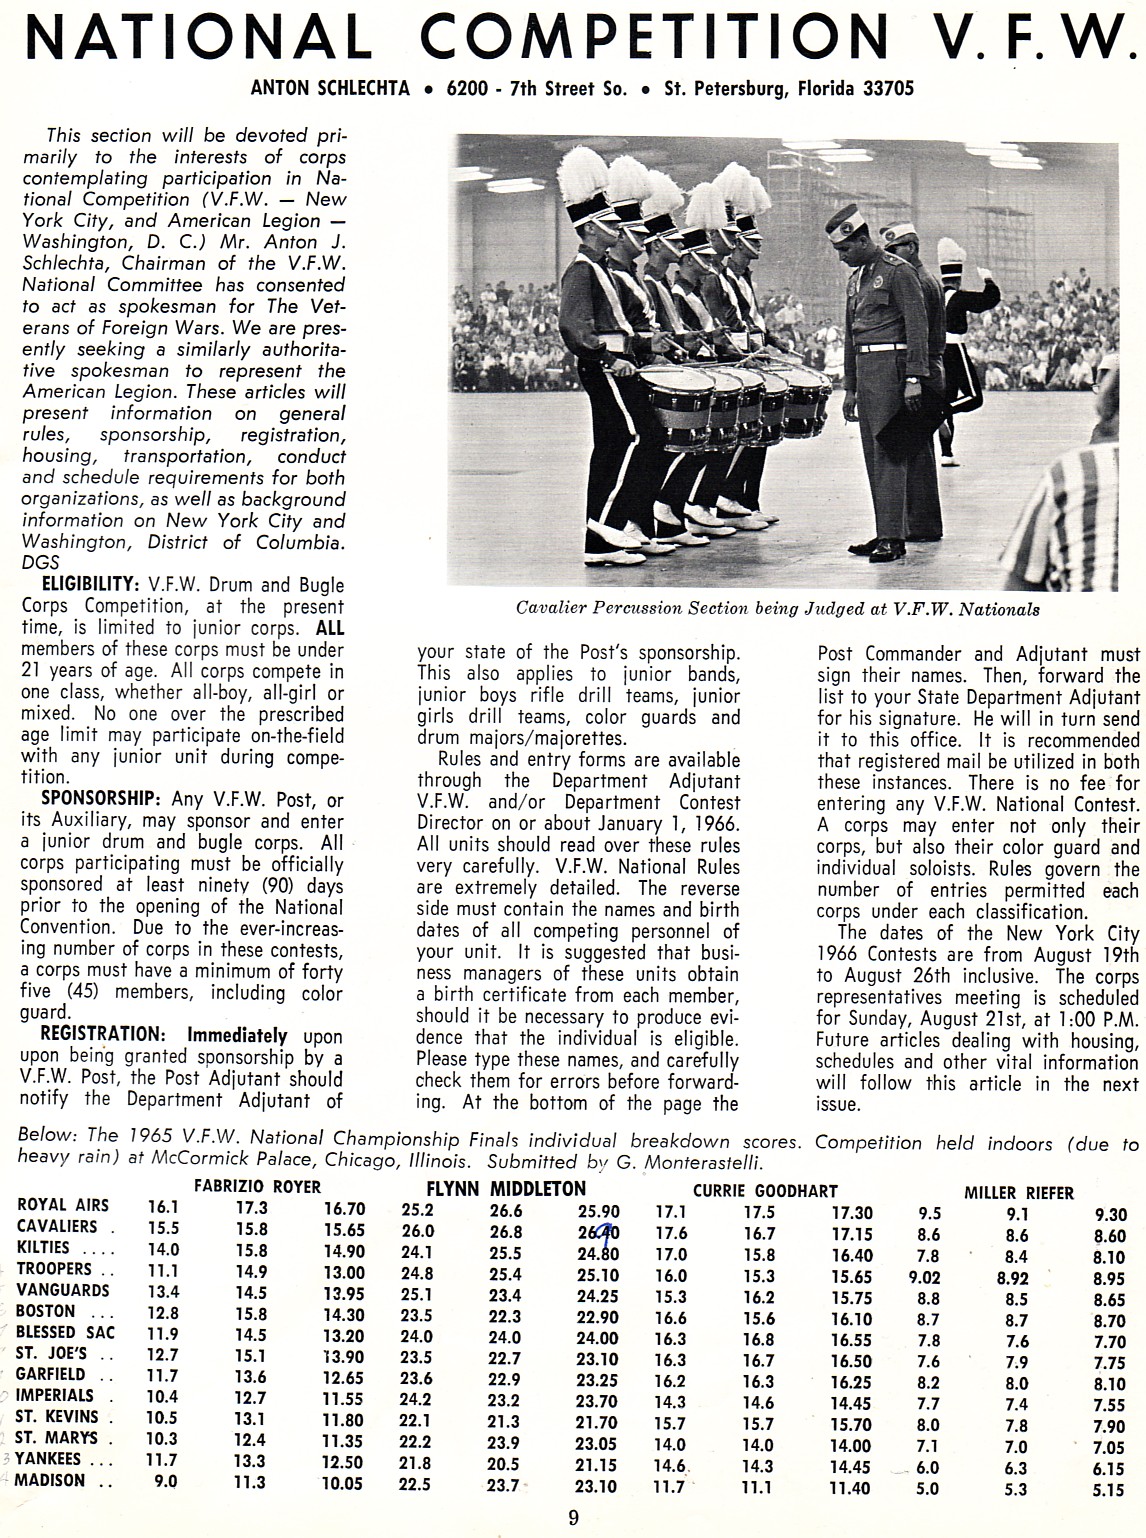 Historical Drum Corps Publications: National Competition V.F.W. (pic